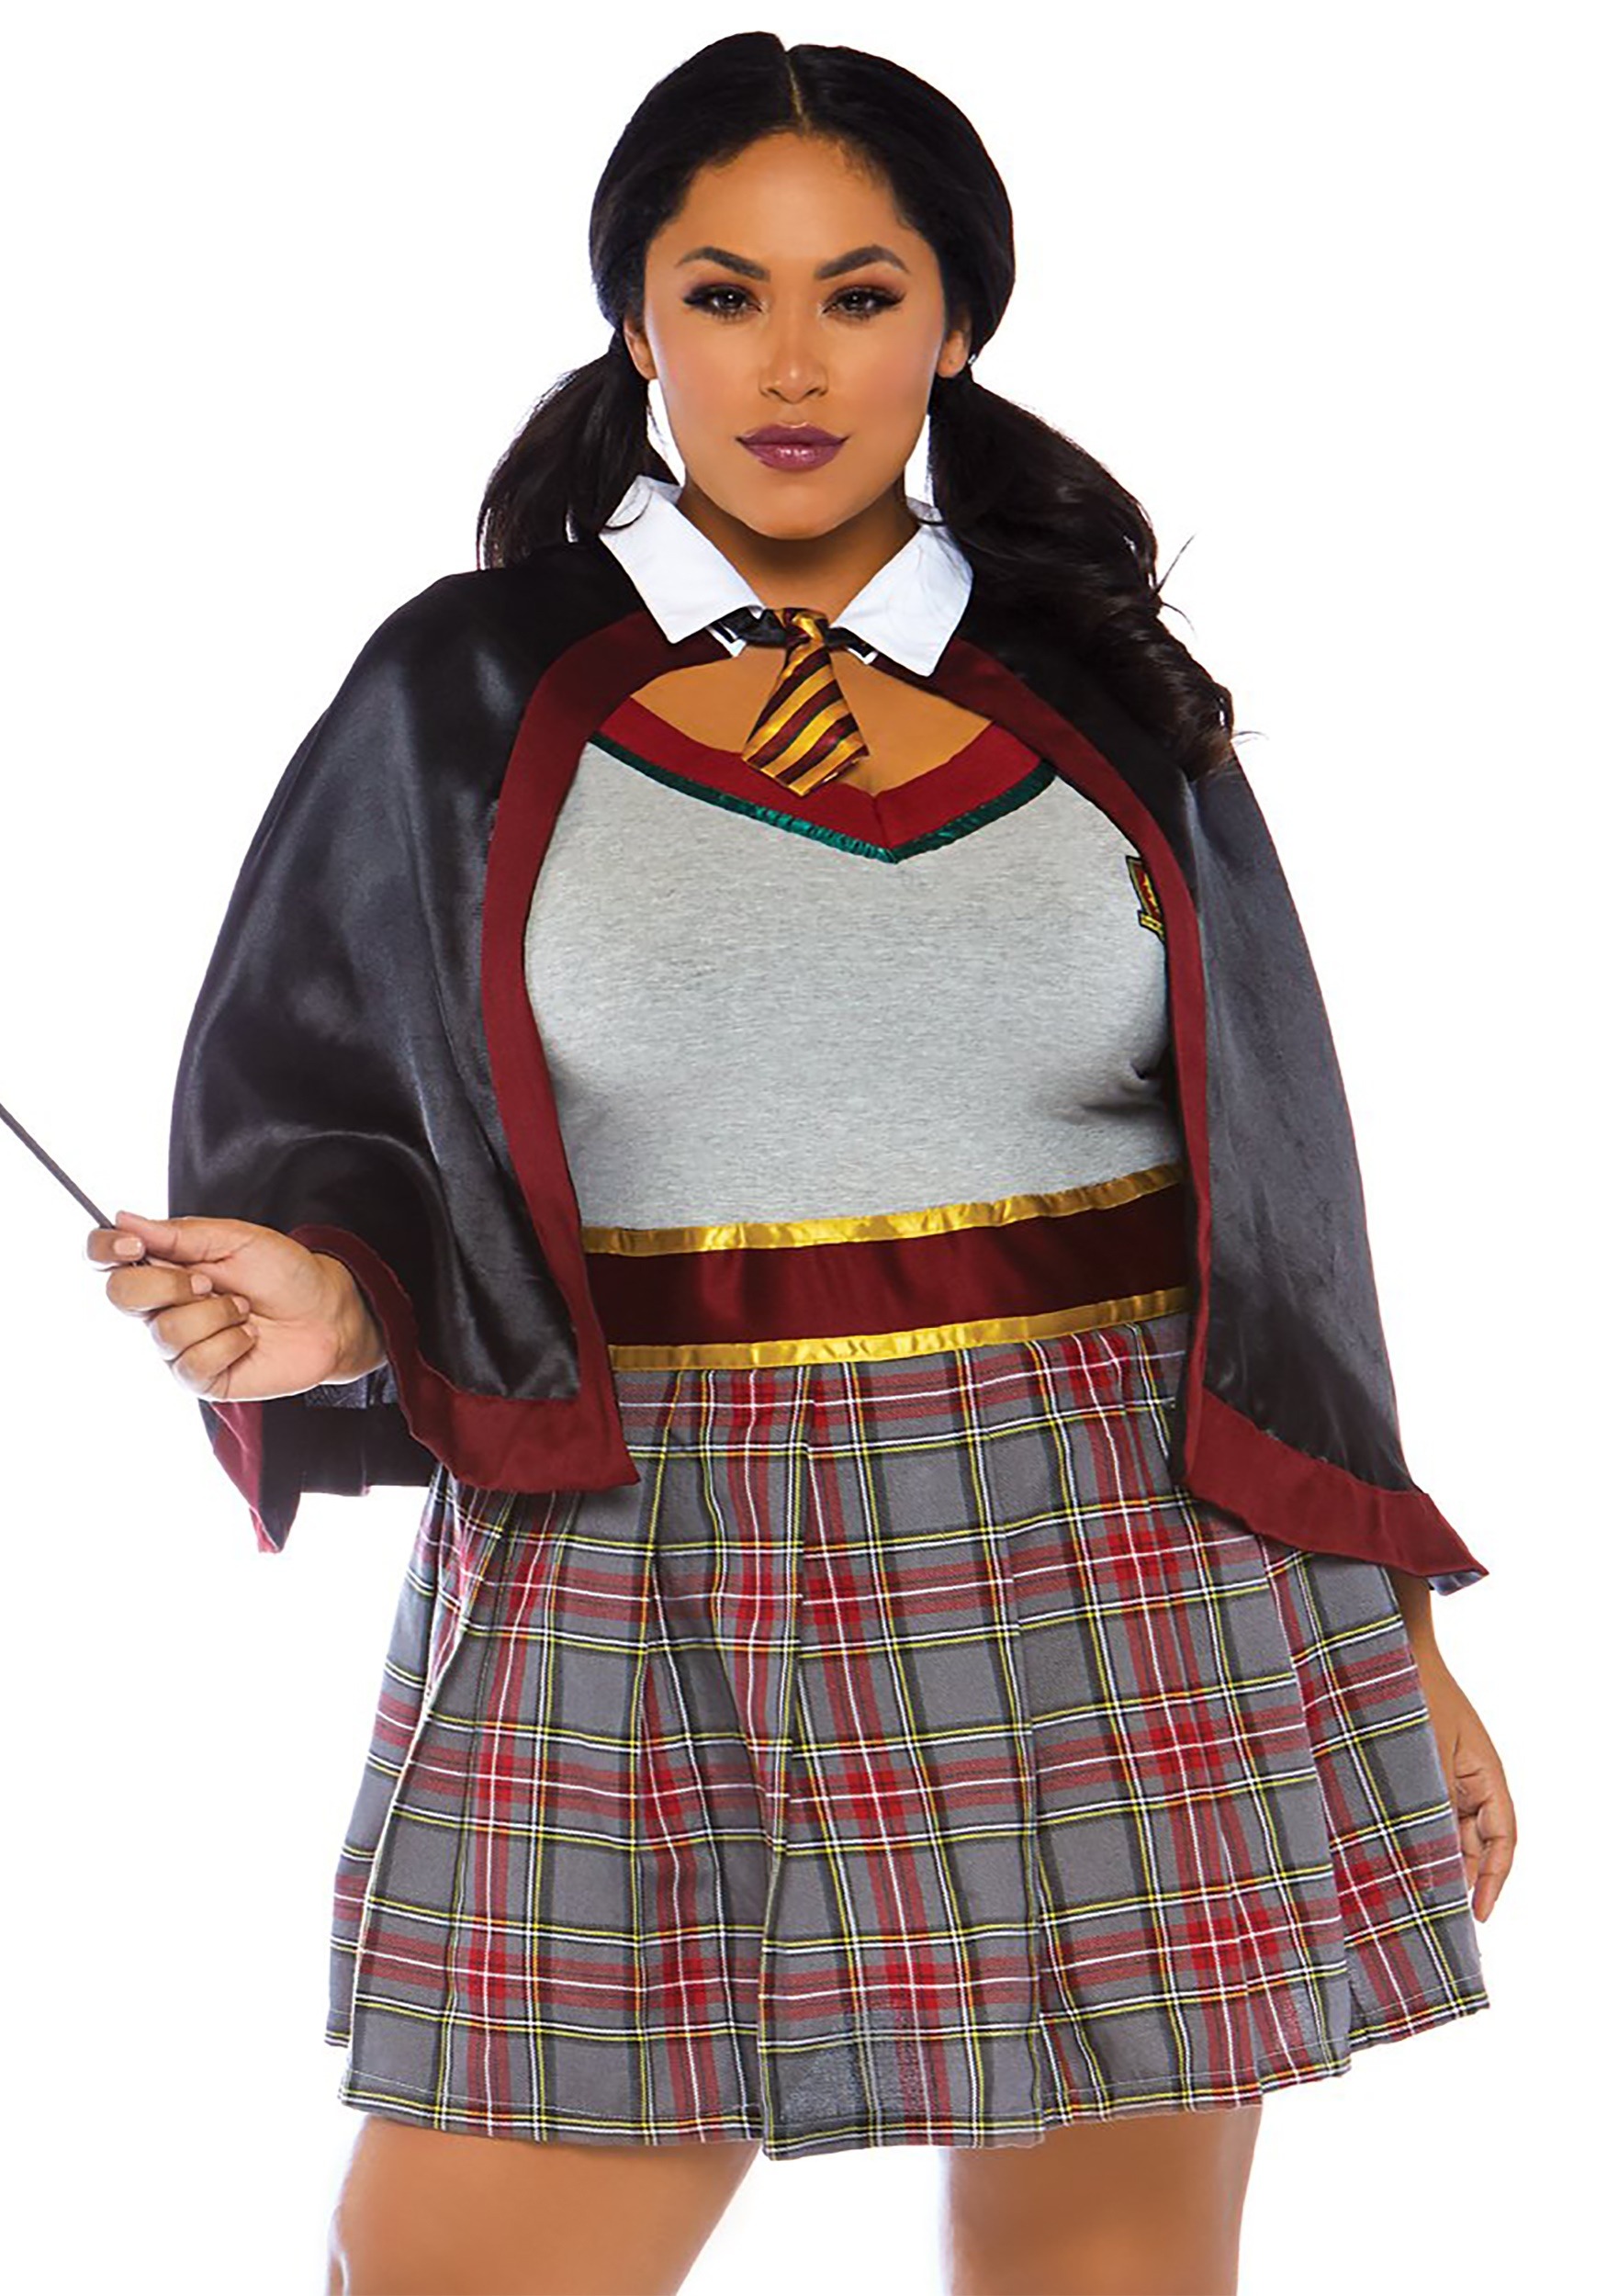 Adult's Plus Size Spell Casting School Girl Costume